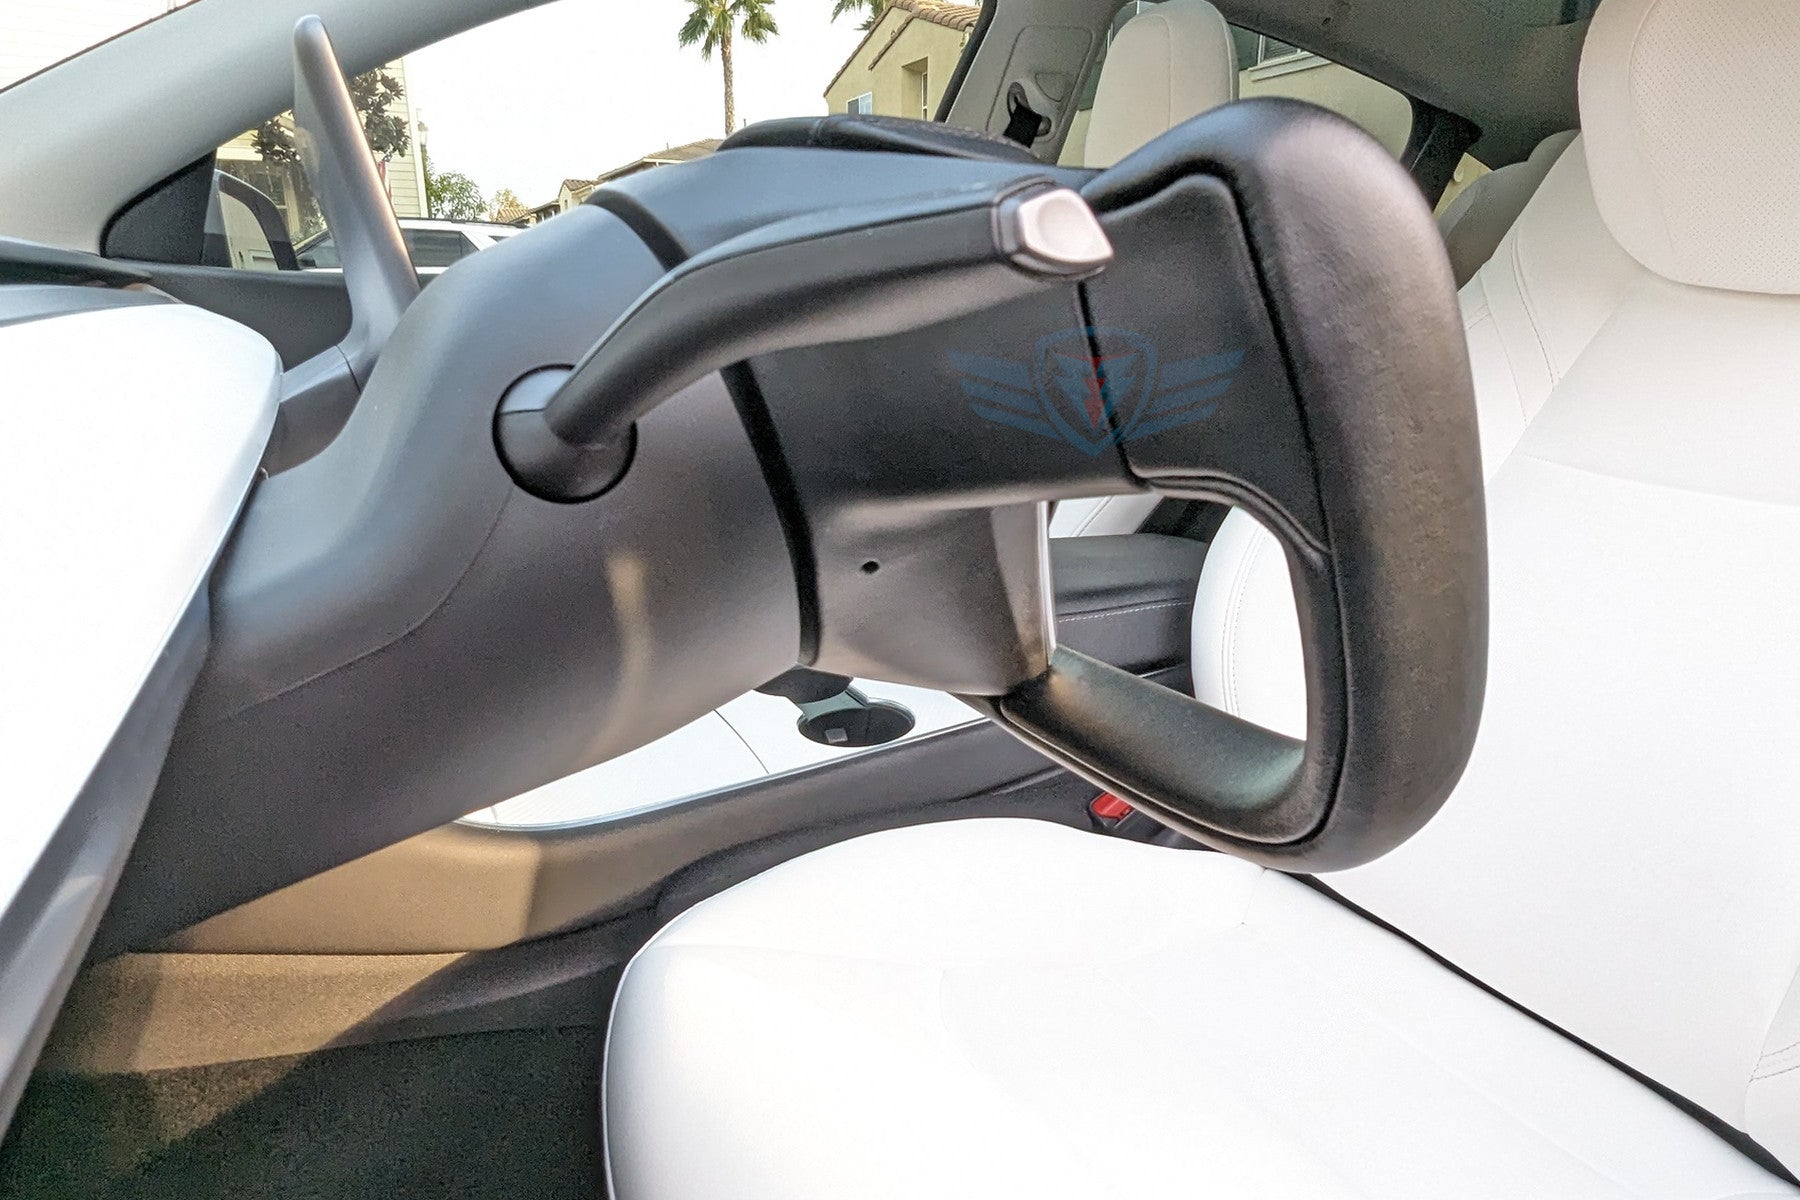 Tesla Model 3 / Y Upgraded Steering Yoke (Latest Version) - Black Nappa Airbag Cover with Carbon